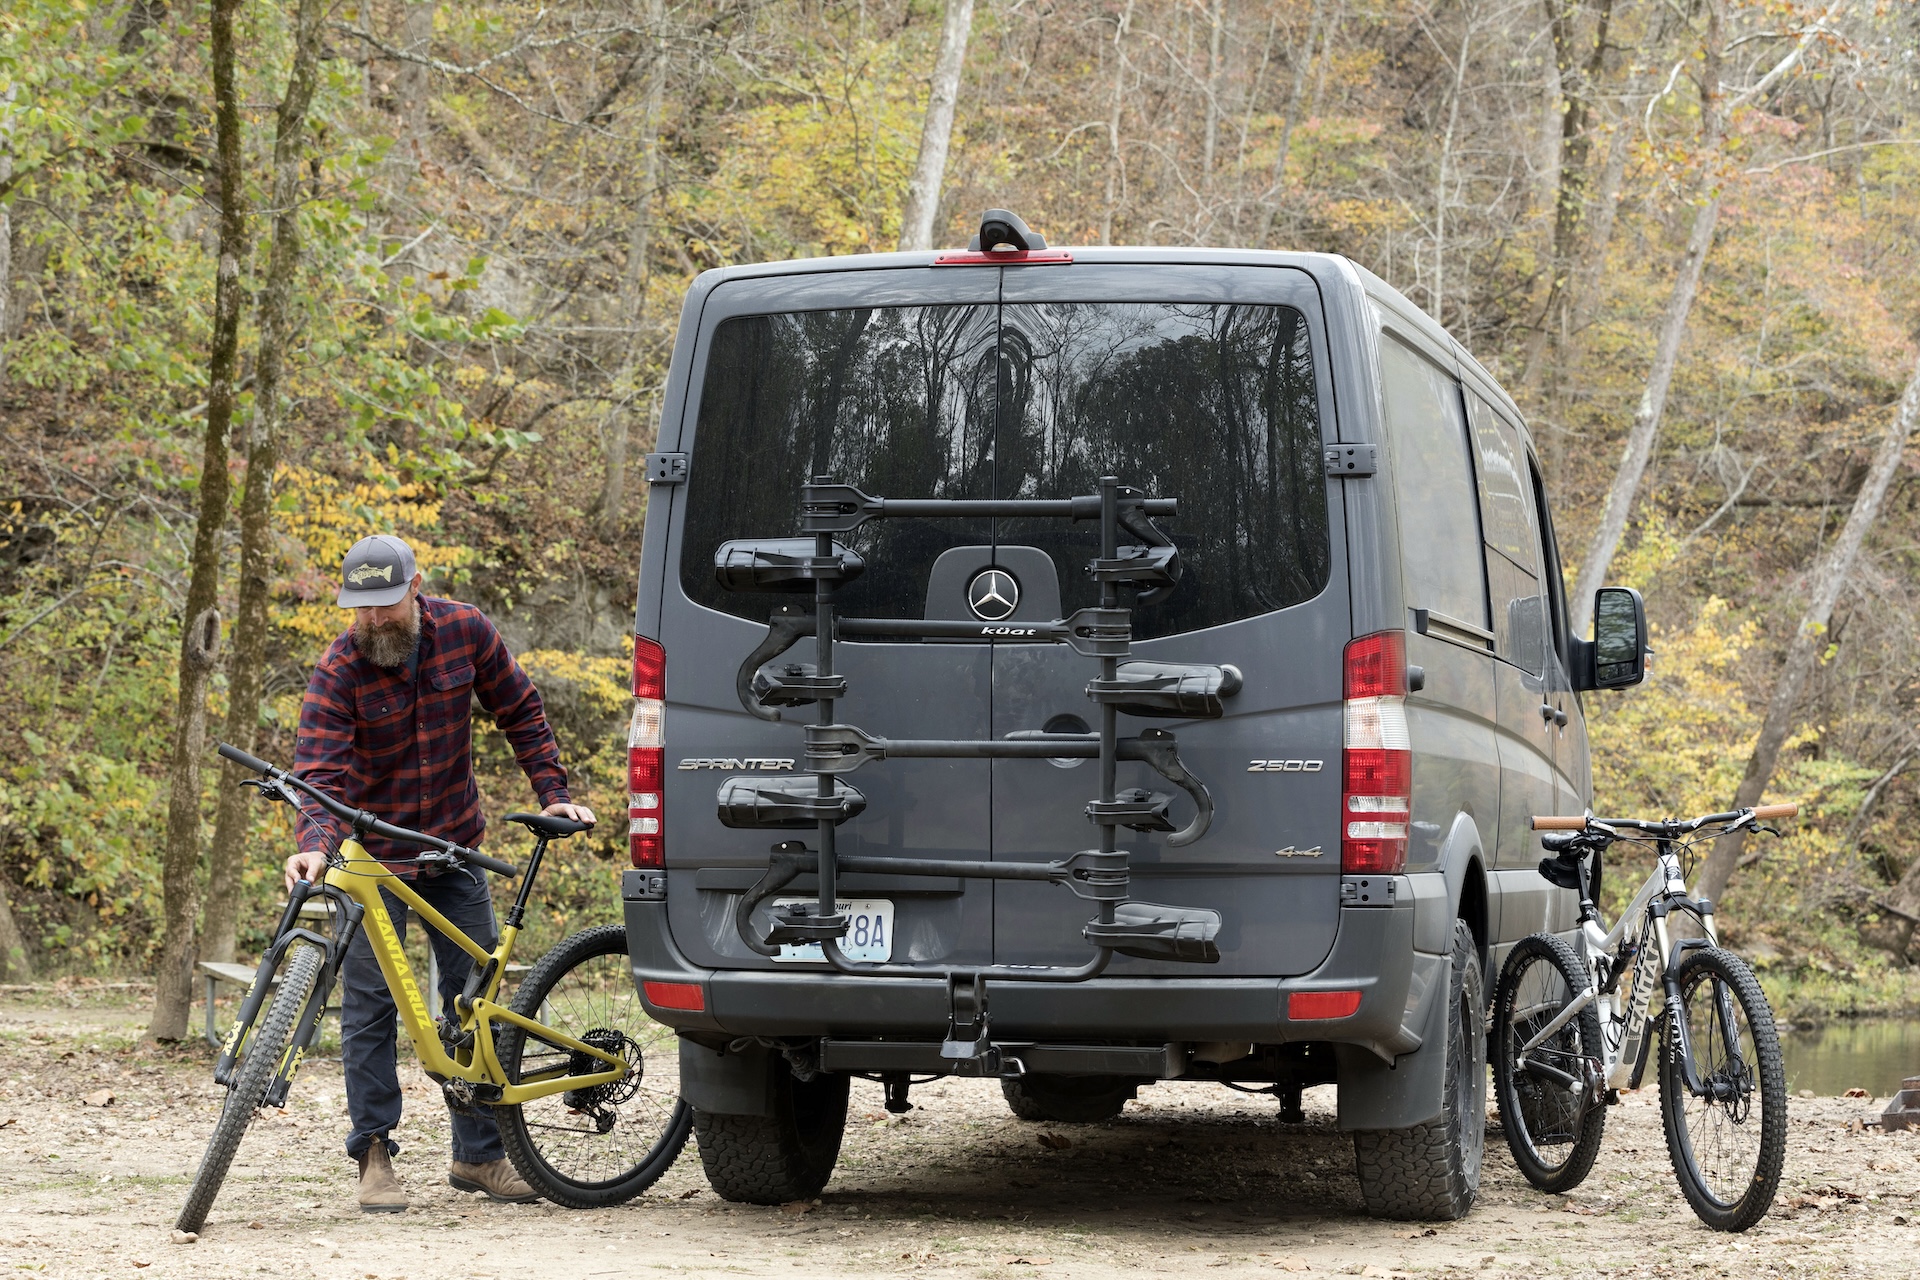 A bearded man unloads a mountain bike next to a Sprinter-style van with a Küat Transfer v2 rack on the back.